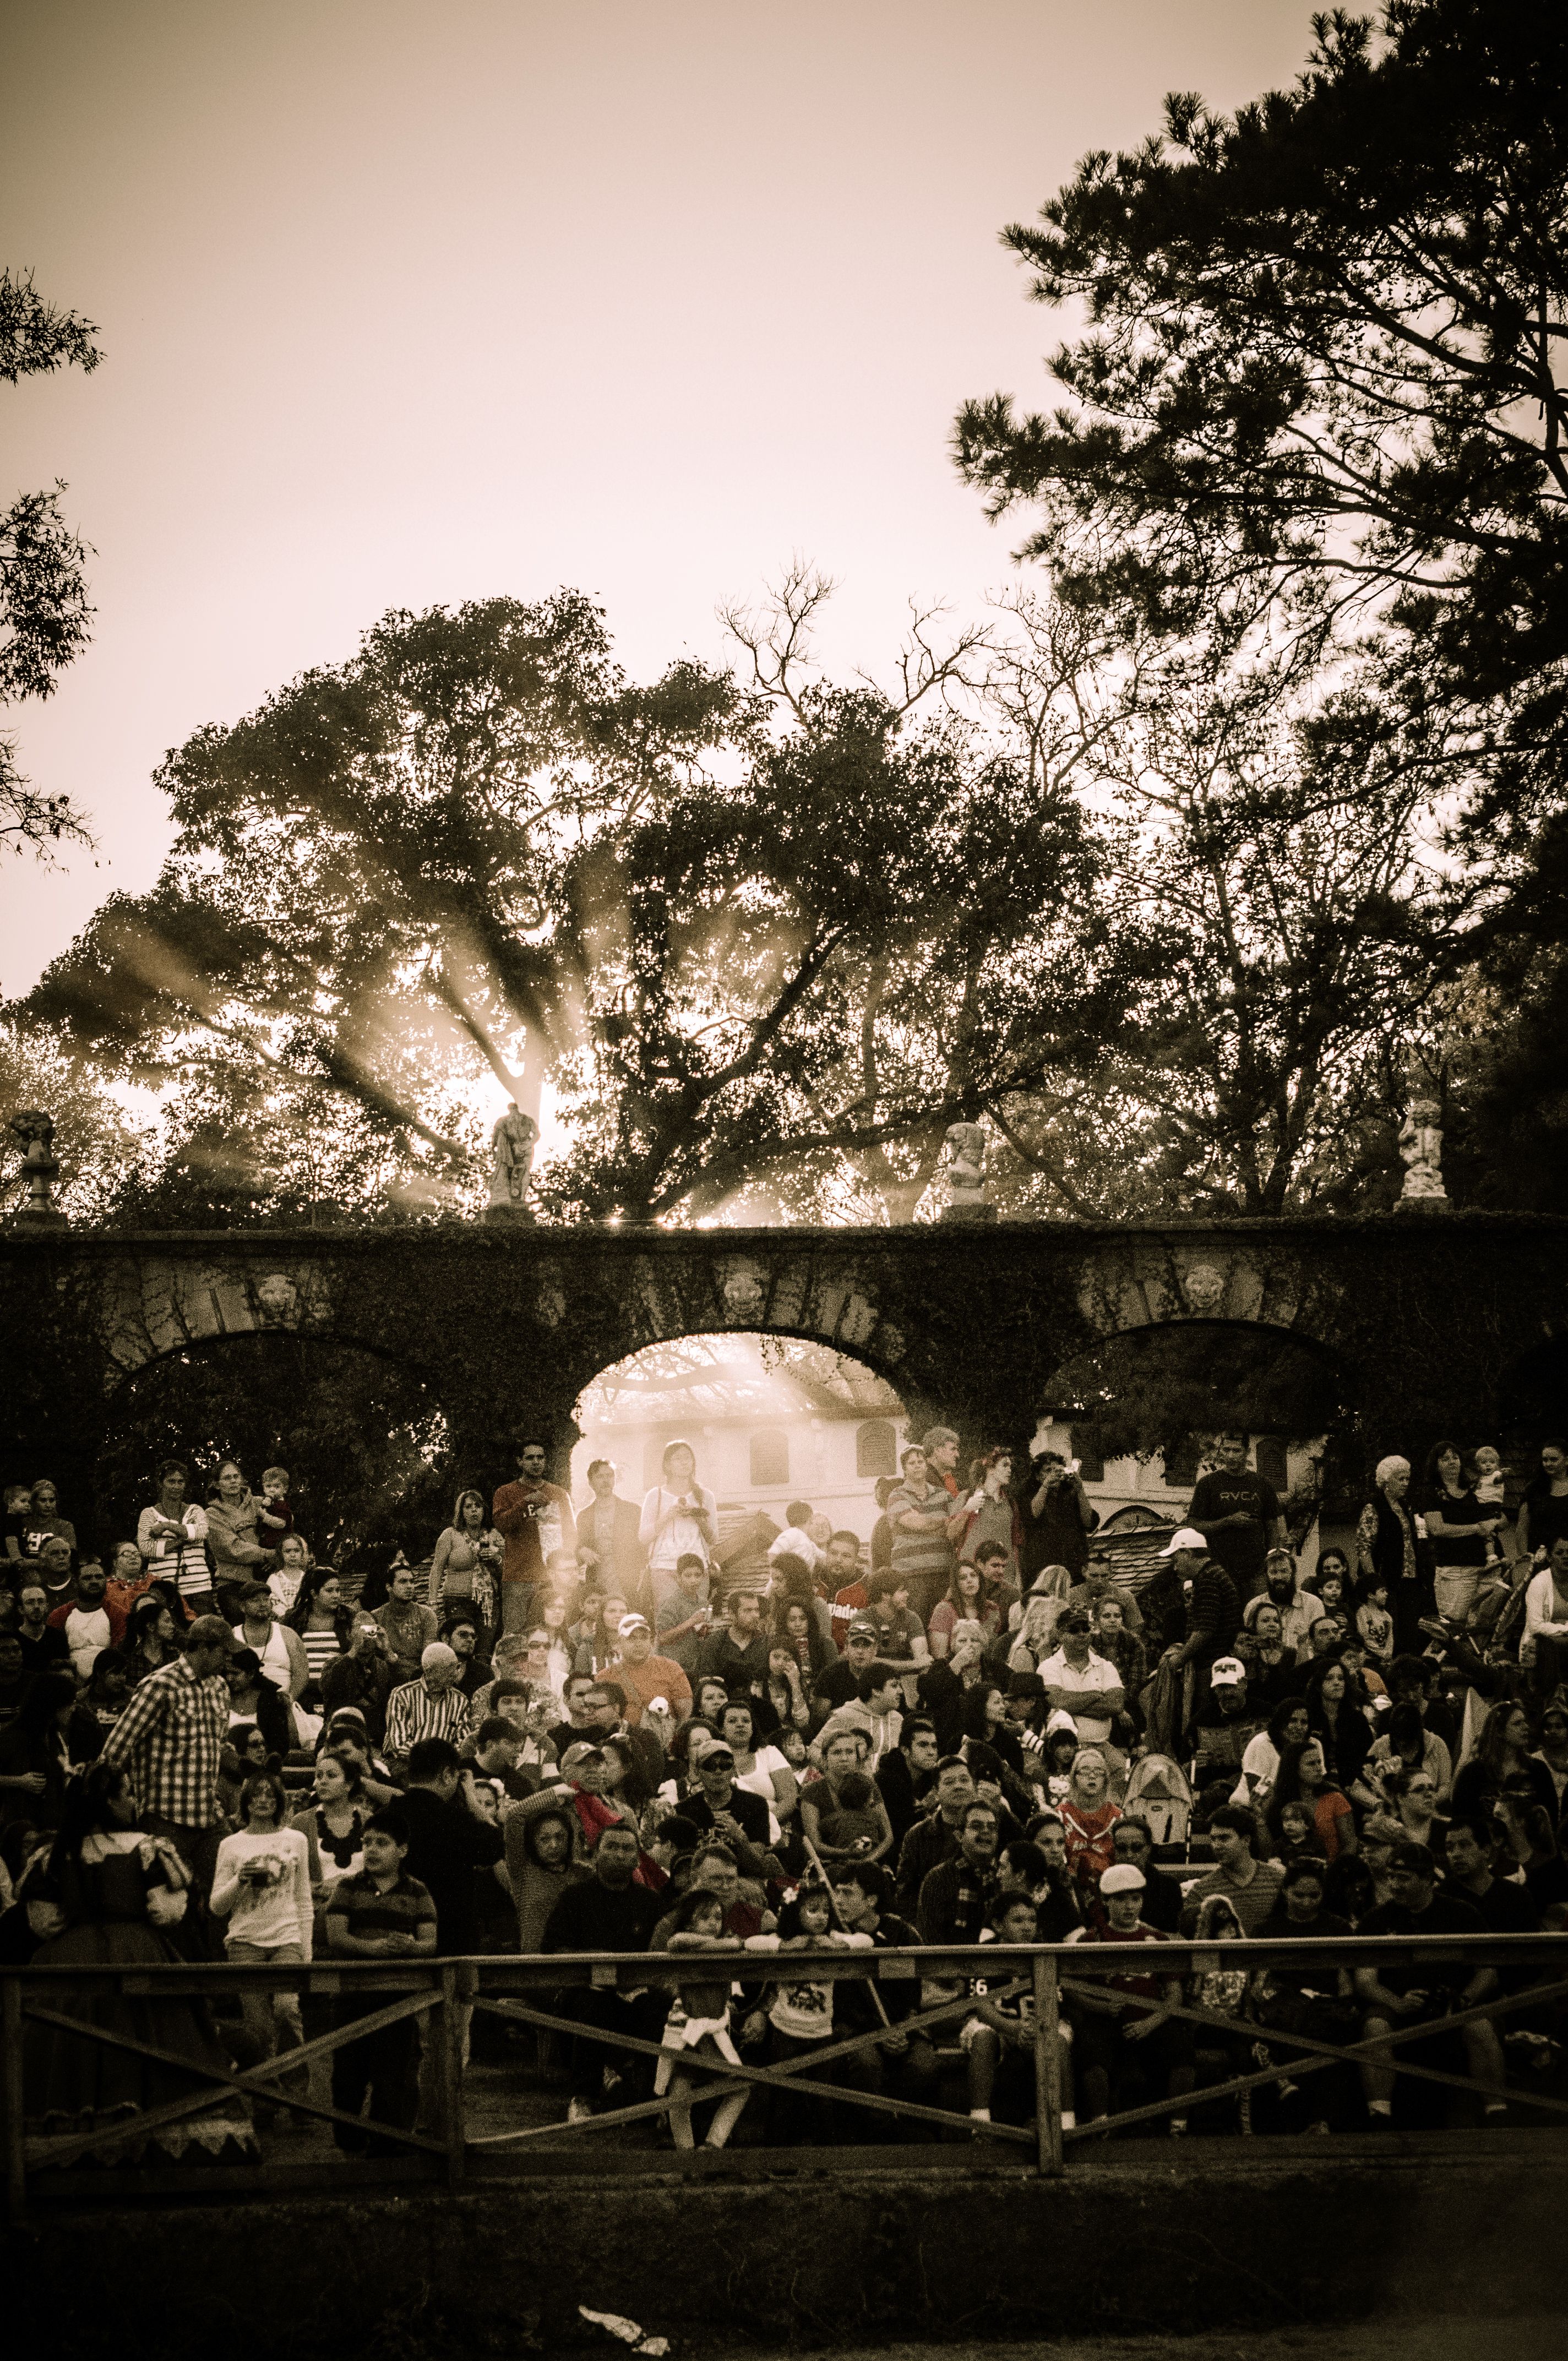 A beautiful sepia shot of the joust audience, this is what the knights, squires, and maidens see- isn't it glorious? Huzzah!